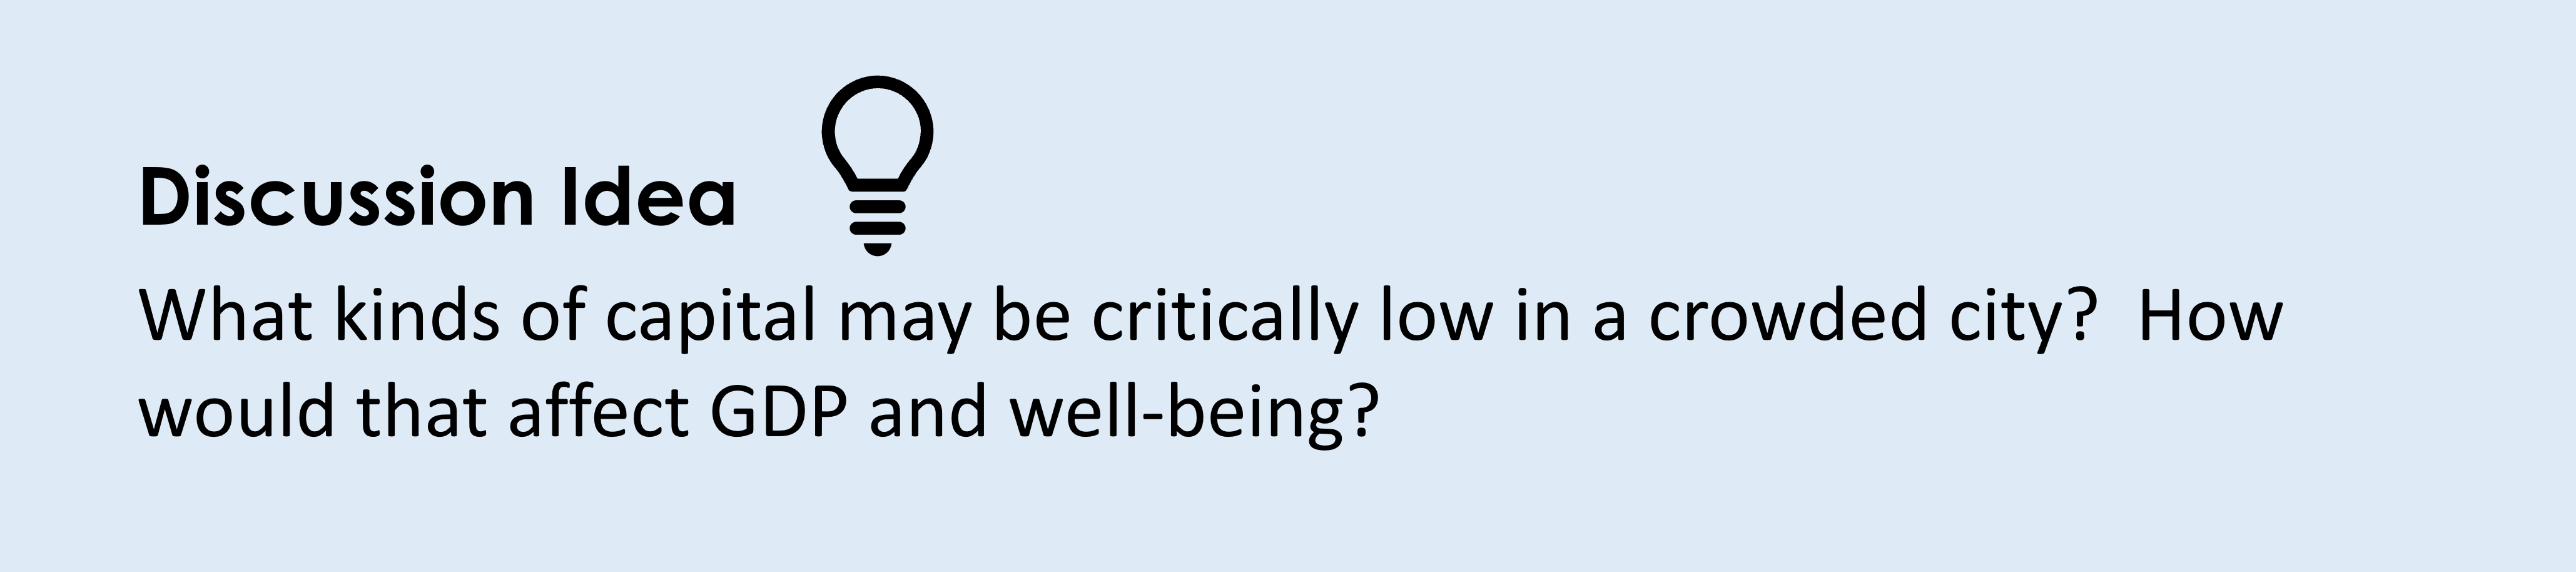 Discussion Idea What kinds of capital may be critically low in a crowded city? How would that affect GDP and well-being?